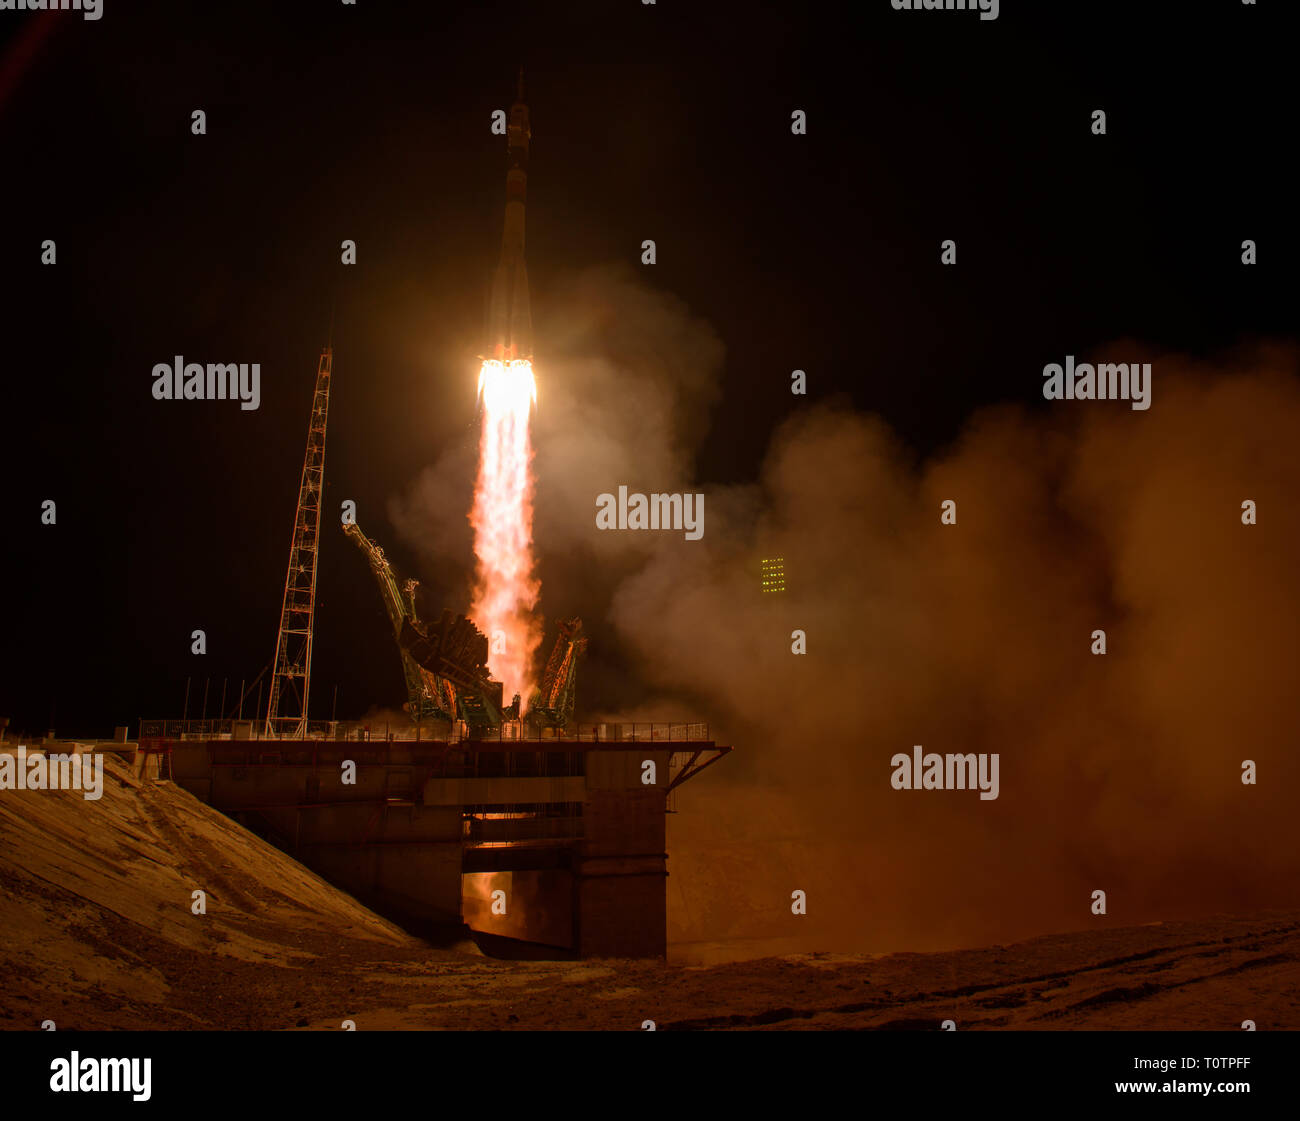 The Russian Soyuz MS-12 rocket blasts off from the Baikonur Cosmodrome March 15, 2019 in Baikonur, Kazakhstan. The Expedition 59 crew: Nick Hague and Christina Koch of NASA and Alexey Ovchinin of Roscosmos will launch March 14th for a six-and-a-half month mission on the International Space Station. Stock Photo